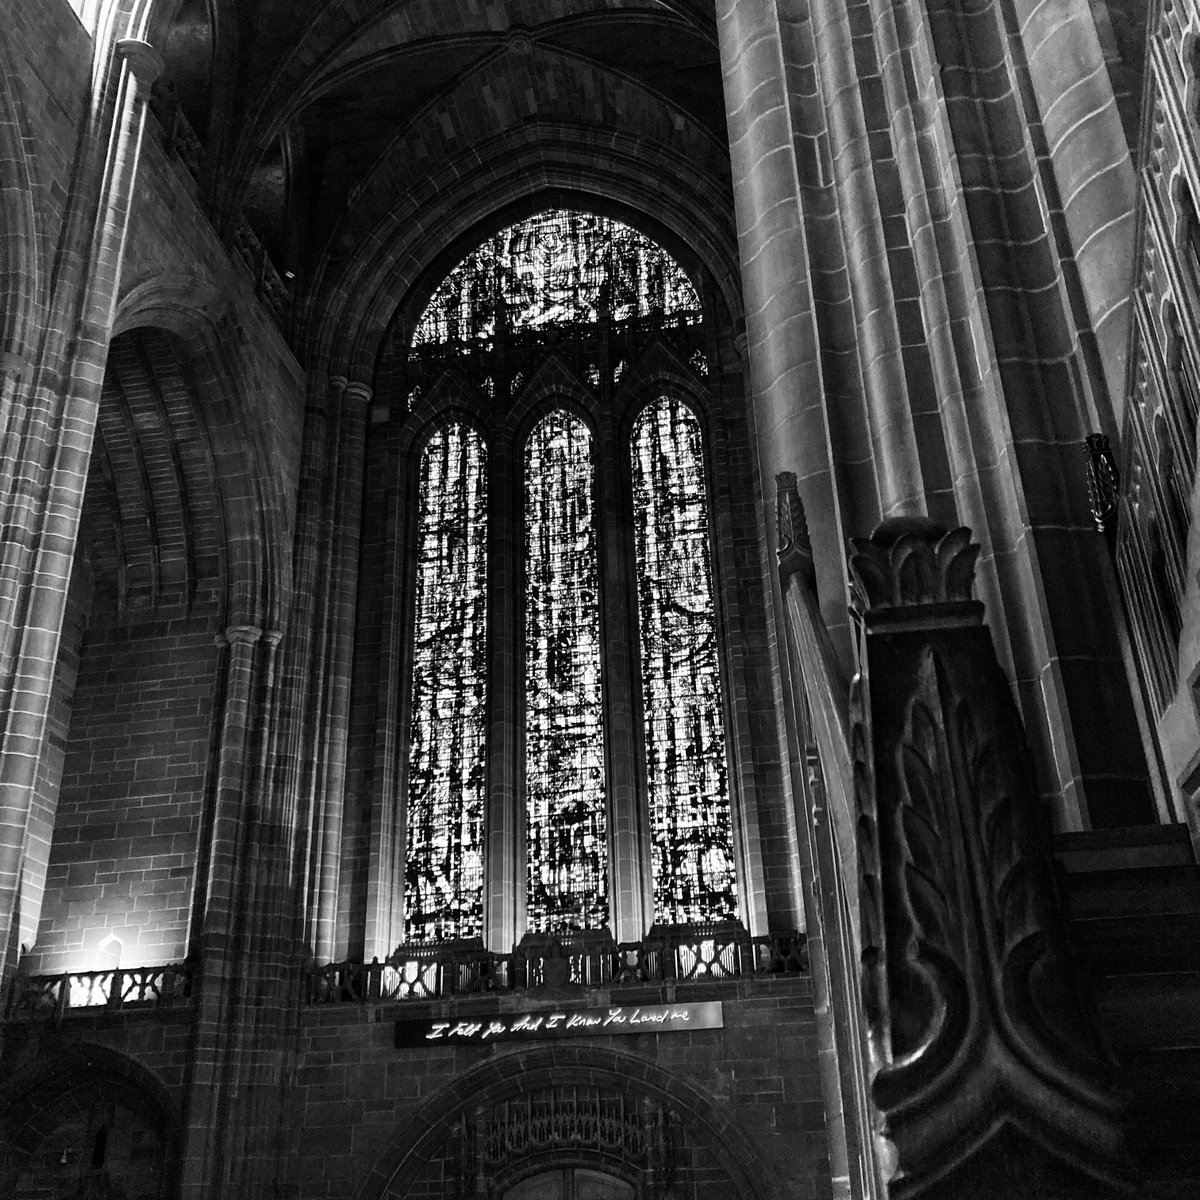 The West window of Liverpool Anglican Cathedral from below the Dulverton Bridge... #photography #photo #bnwphotography #blackandwhitephotography #monochromephotography #Monochrome #squareformat #light #shadows #liverpoolcathedral #Westwindow